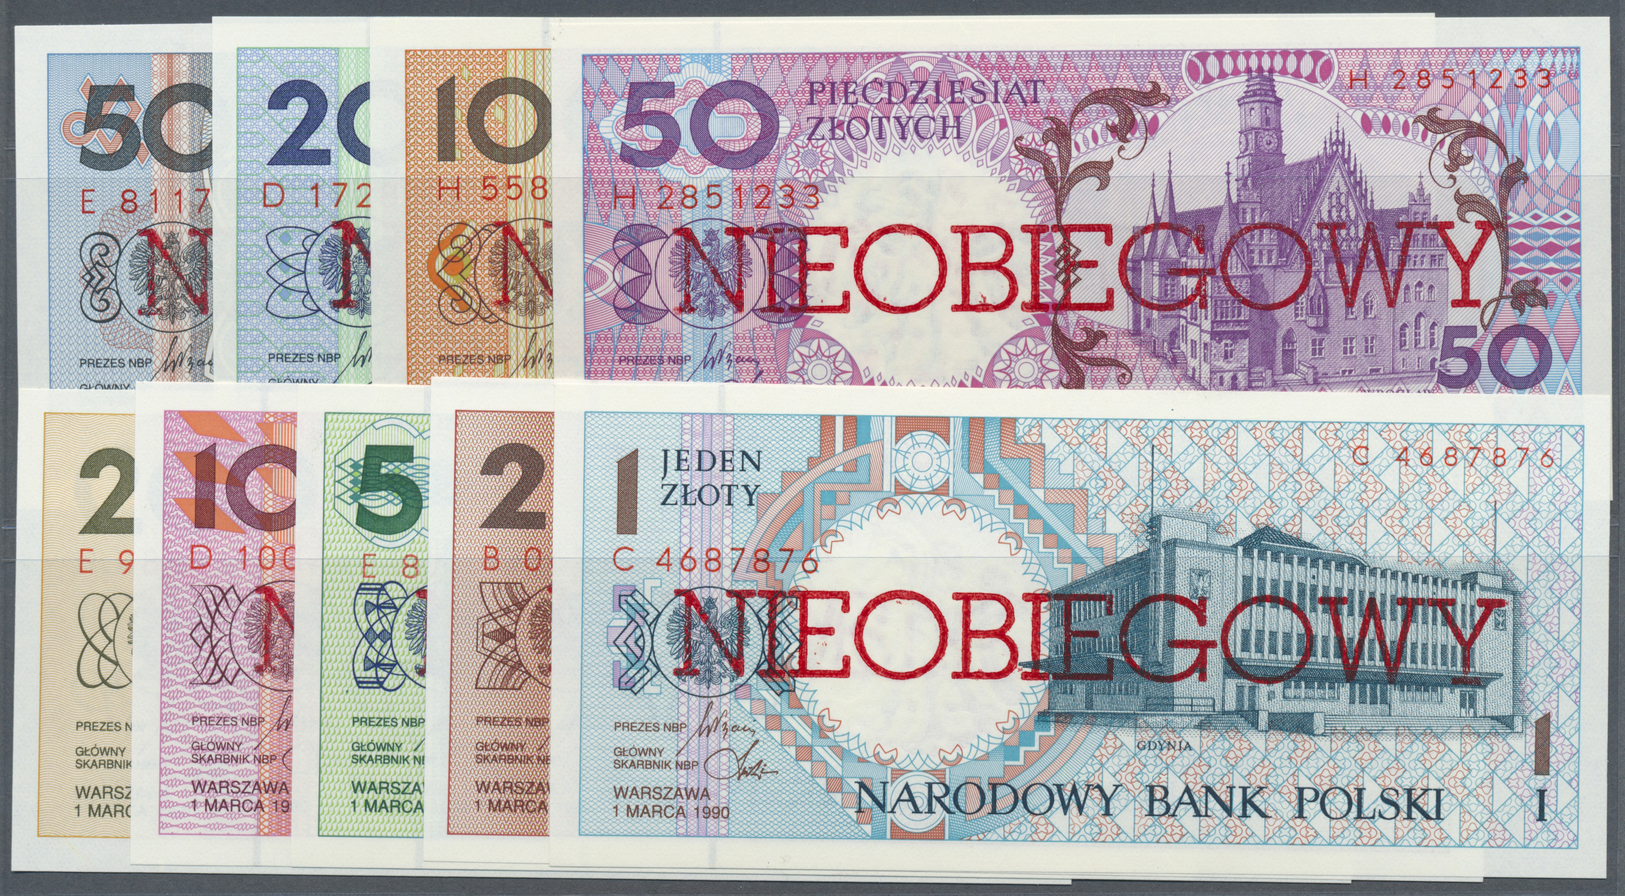 01995 Poland / Polen: Set Of 9 Notes Of An Unissued Series Of 1990 Overprinted "not Issued" (Nieobiegowy) Containing The - Poland